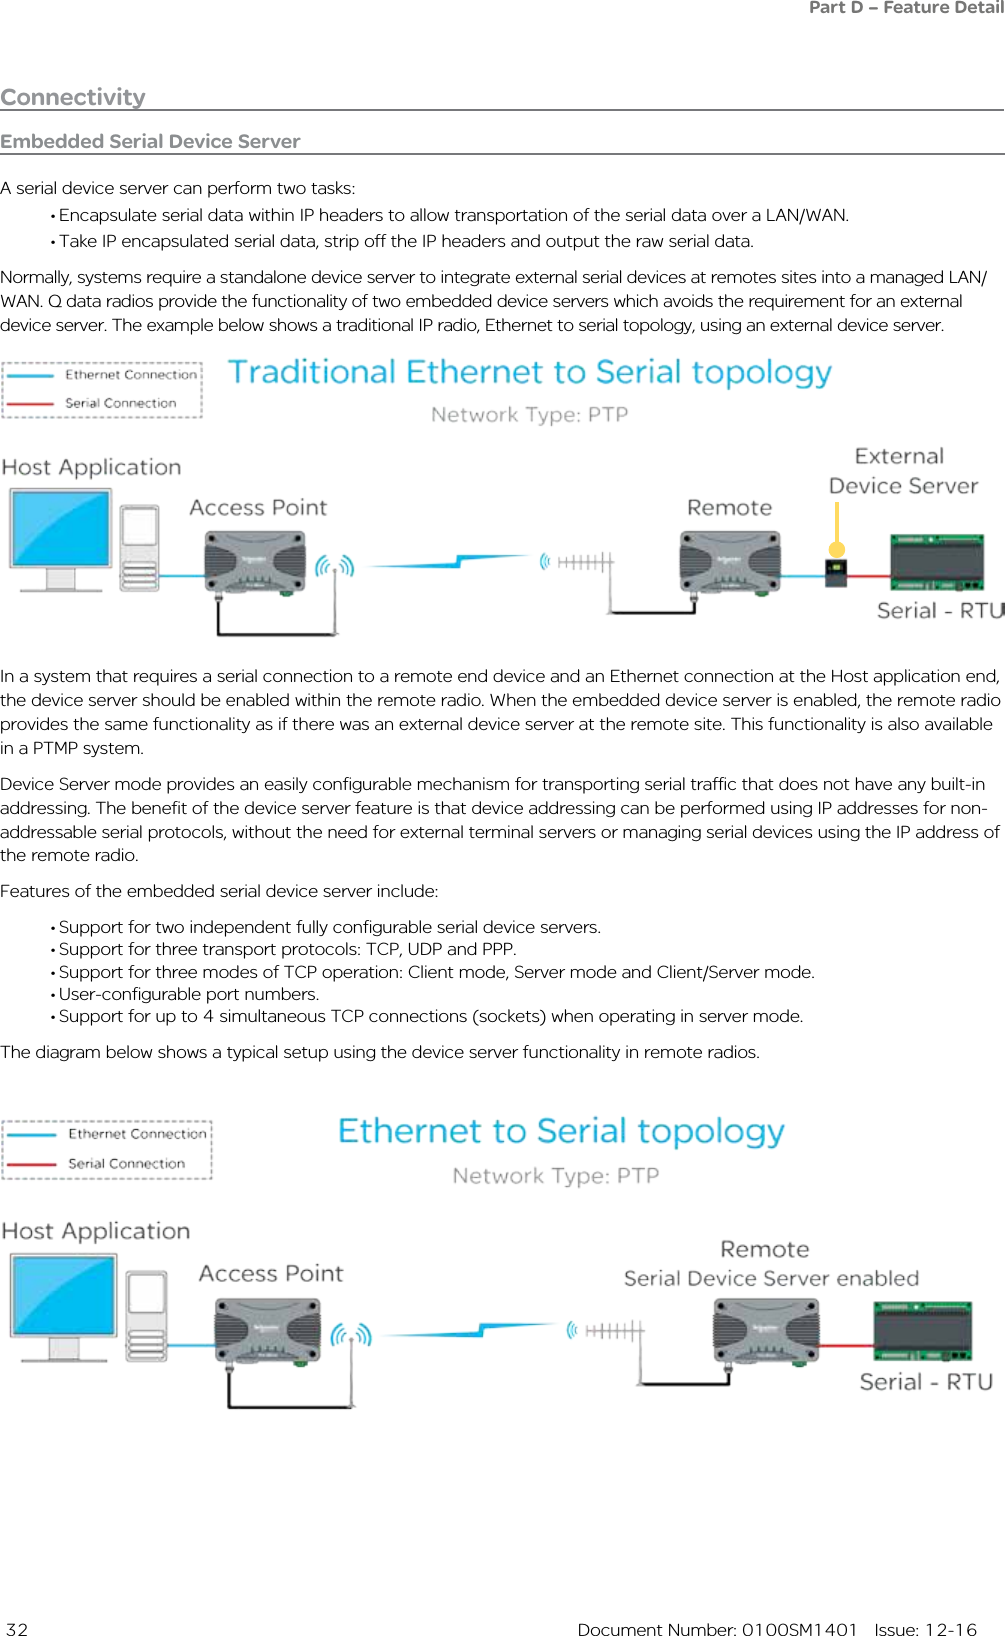  32  Document Number: 0100SM1401   Issue: 12-16ConnectivityEmbedded Serial Device ServerA serial device server can perform two tasks: • Encapsulate serial data within IP headers to allow transportation of the serial data over a LAN/WAN.• Take IP encapsulated serial data, strip off the IP headers and output the raw serial data. Normally, systems require a standalone device server to integrate external serial devices at remotes sites into a managed LAN/WAN. Q data radios provide the functionality of two embedded device servers which avoids the requirement for an external device server. The example below shows a traditional IP radio, Ethernet to serial topology, using an external device server.In a system that requires a serial connection to a remote end device and an Ethernet connection at the Host application end, the device server should be enabled within the remote radio. When the embedded device server is enabled, the remote radio provides the same functionality as if there was an external device server at the remote site. This functionality is also available in a PTMP system.Device Server mode provides an easily configurable mechanism for transporting serial traffic that does not have any built-in addressing. The benefit of the device server feature is that device addressing can be performed using IP addresses for non-addressable serial protocols, without the need for external terminal servers or managing serial devices using the IP address of the remote radio. Features of the embedded serial device server include:• Support for two independent fully configurable serial device servers.• Support for three transport protocols: TCP, UDP and PPP.• Support for three modes of TCP operation: Client mode, Server mode and Client/Server mode.• User-configurable port numbers.• Support for up to 4 simultaneous TCP connections (sockets) when operating in server mode.The diagram below shows a typical setup using the device server functionality in remote radios. Part D – Feature Detail